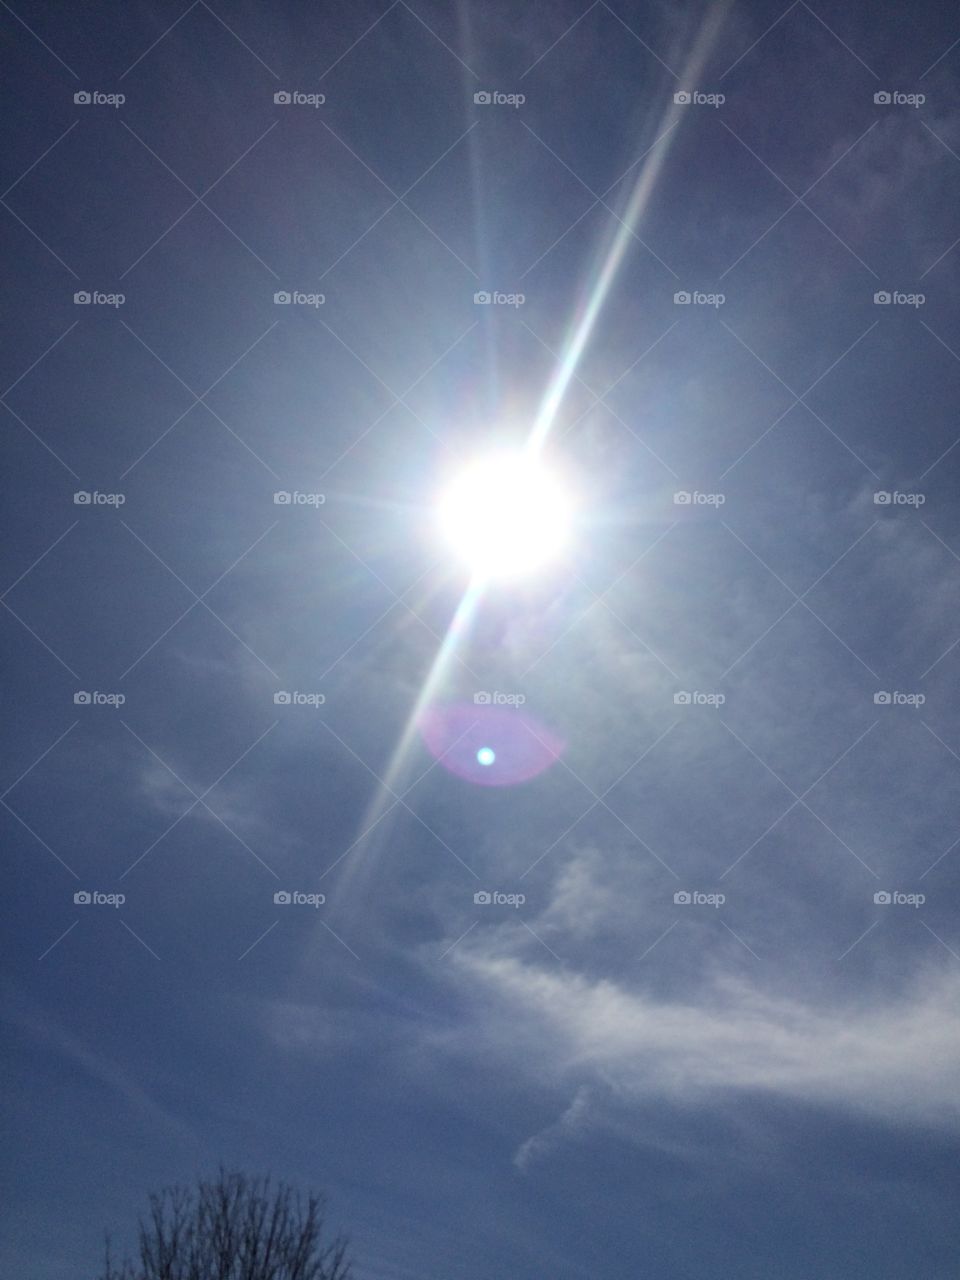 Sunbeam with lens flare